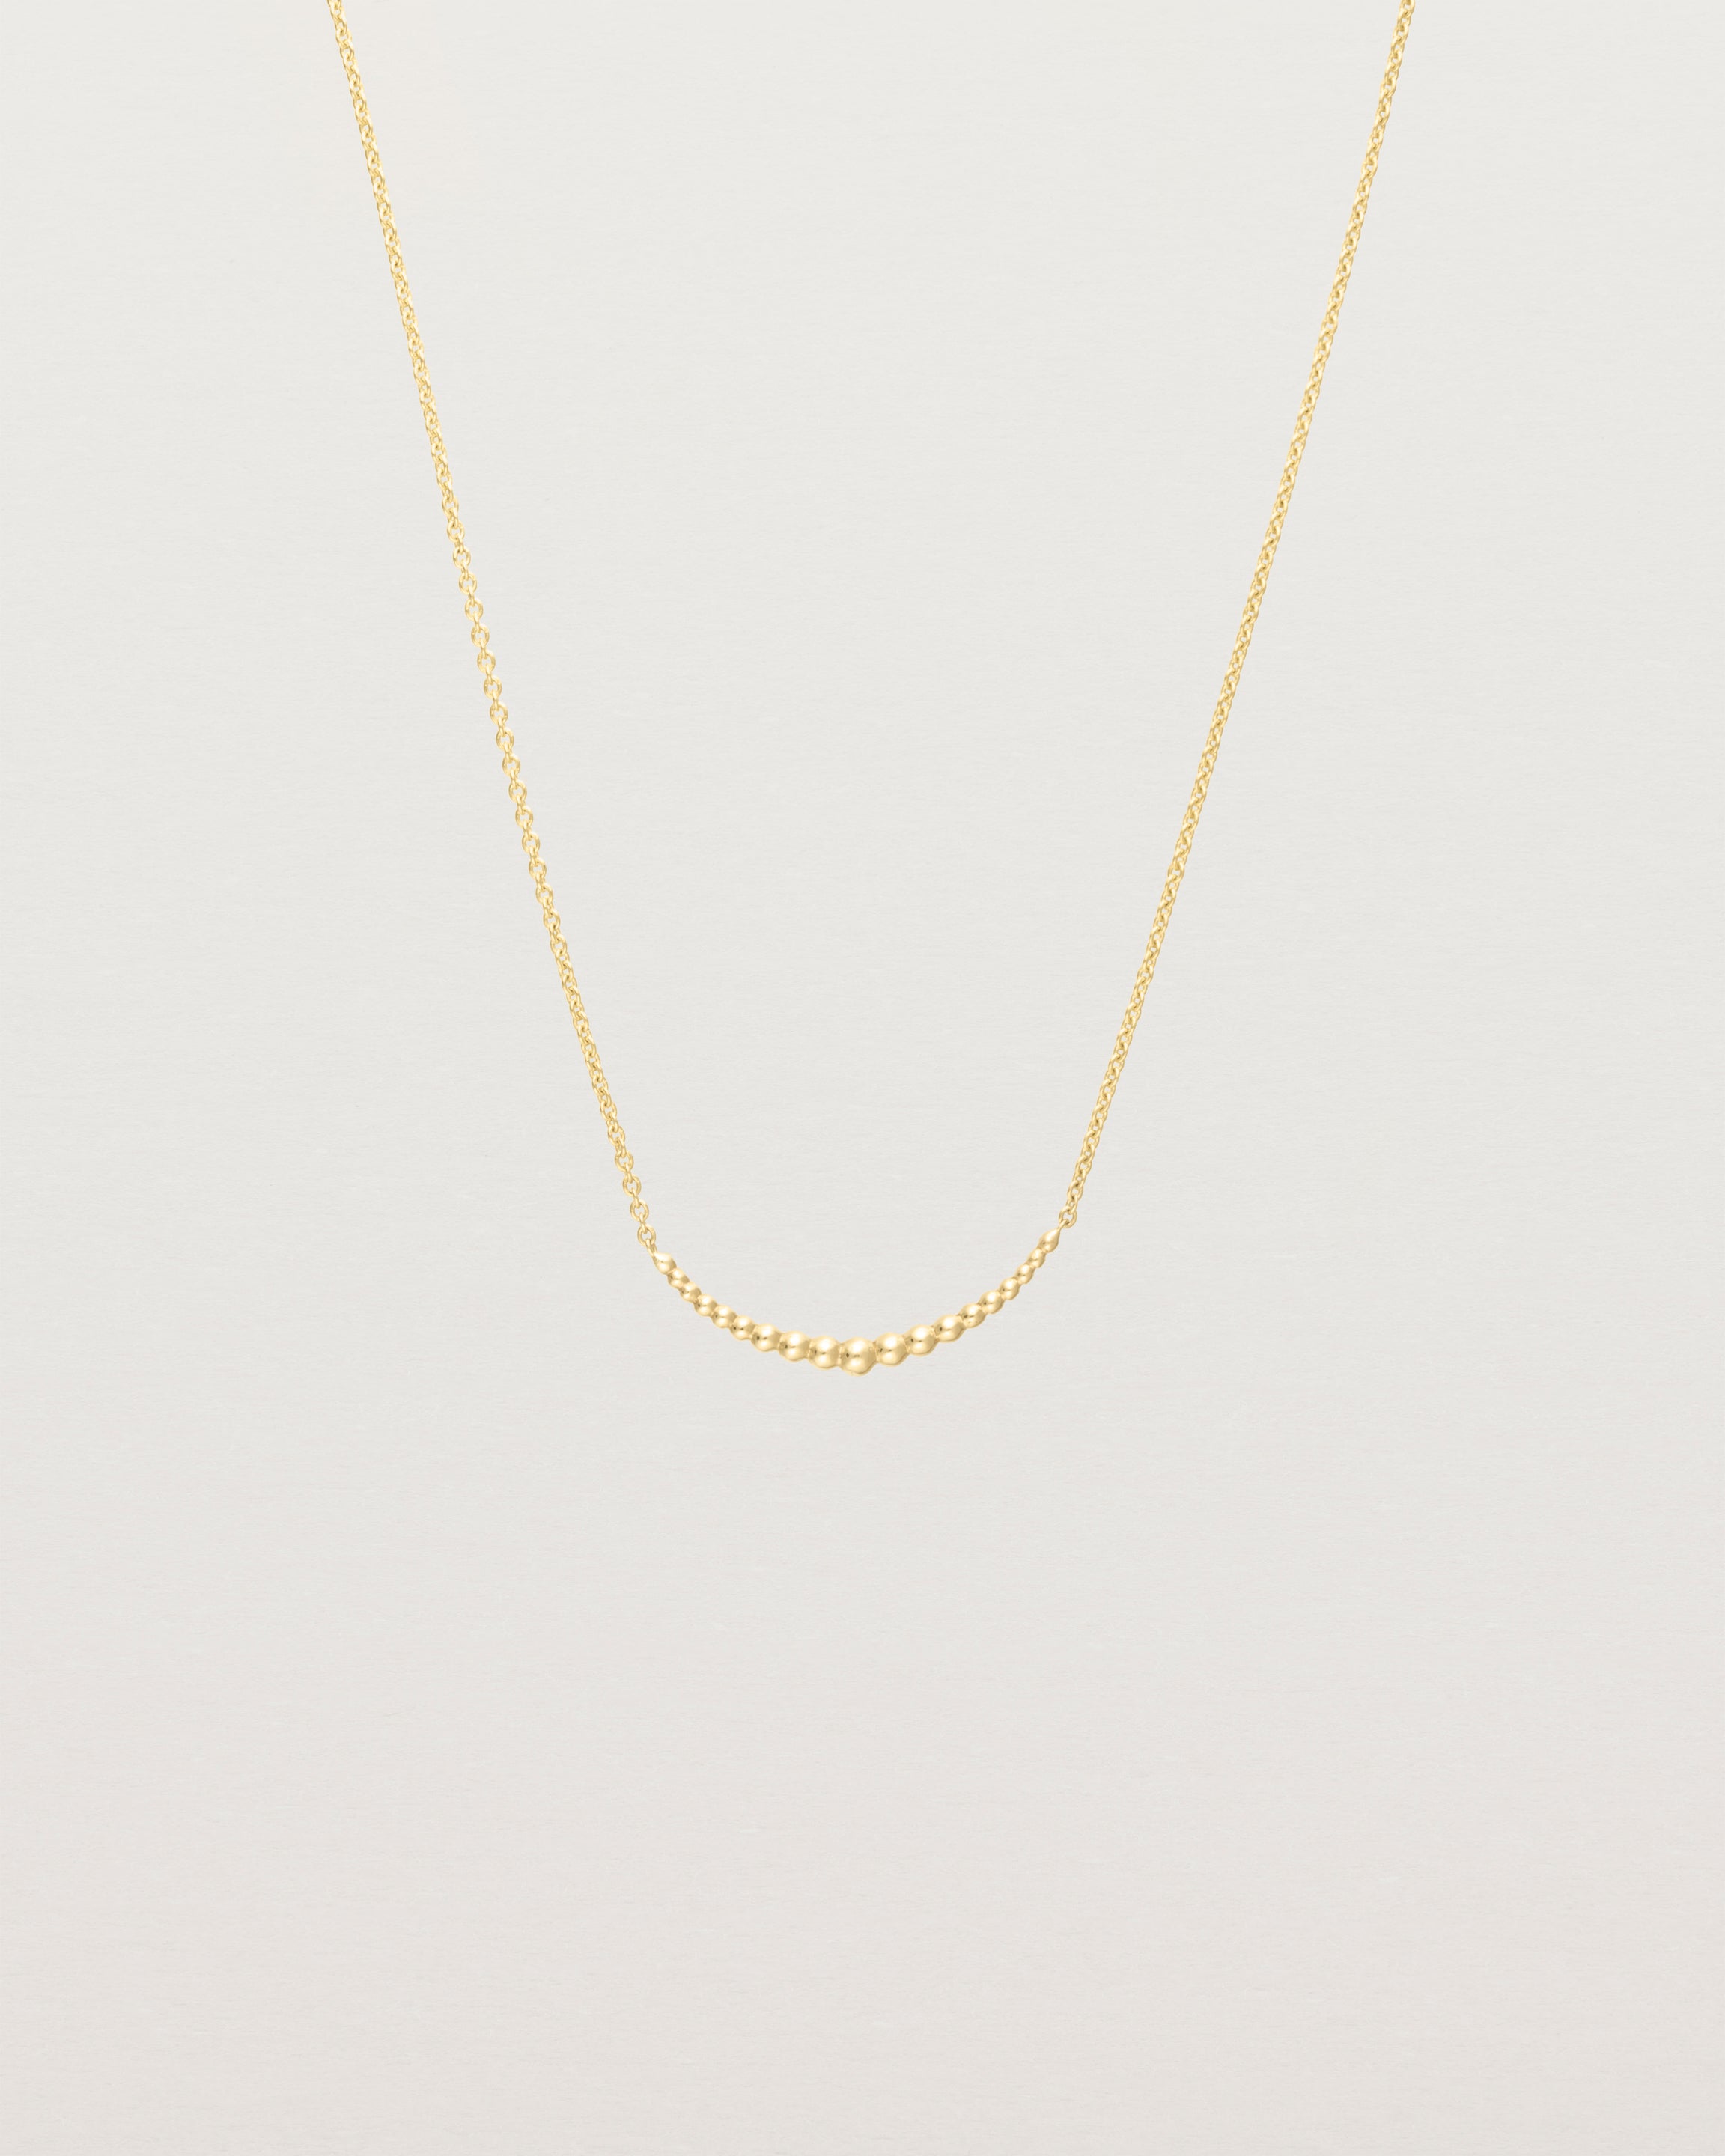 Front view of the Crescent Necklace in yellow gold.